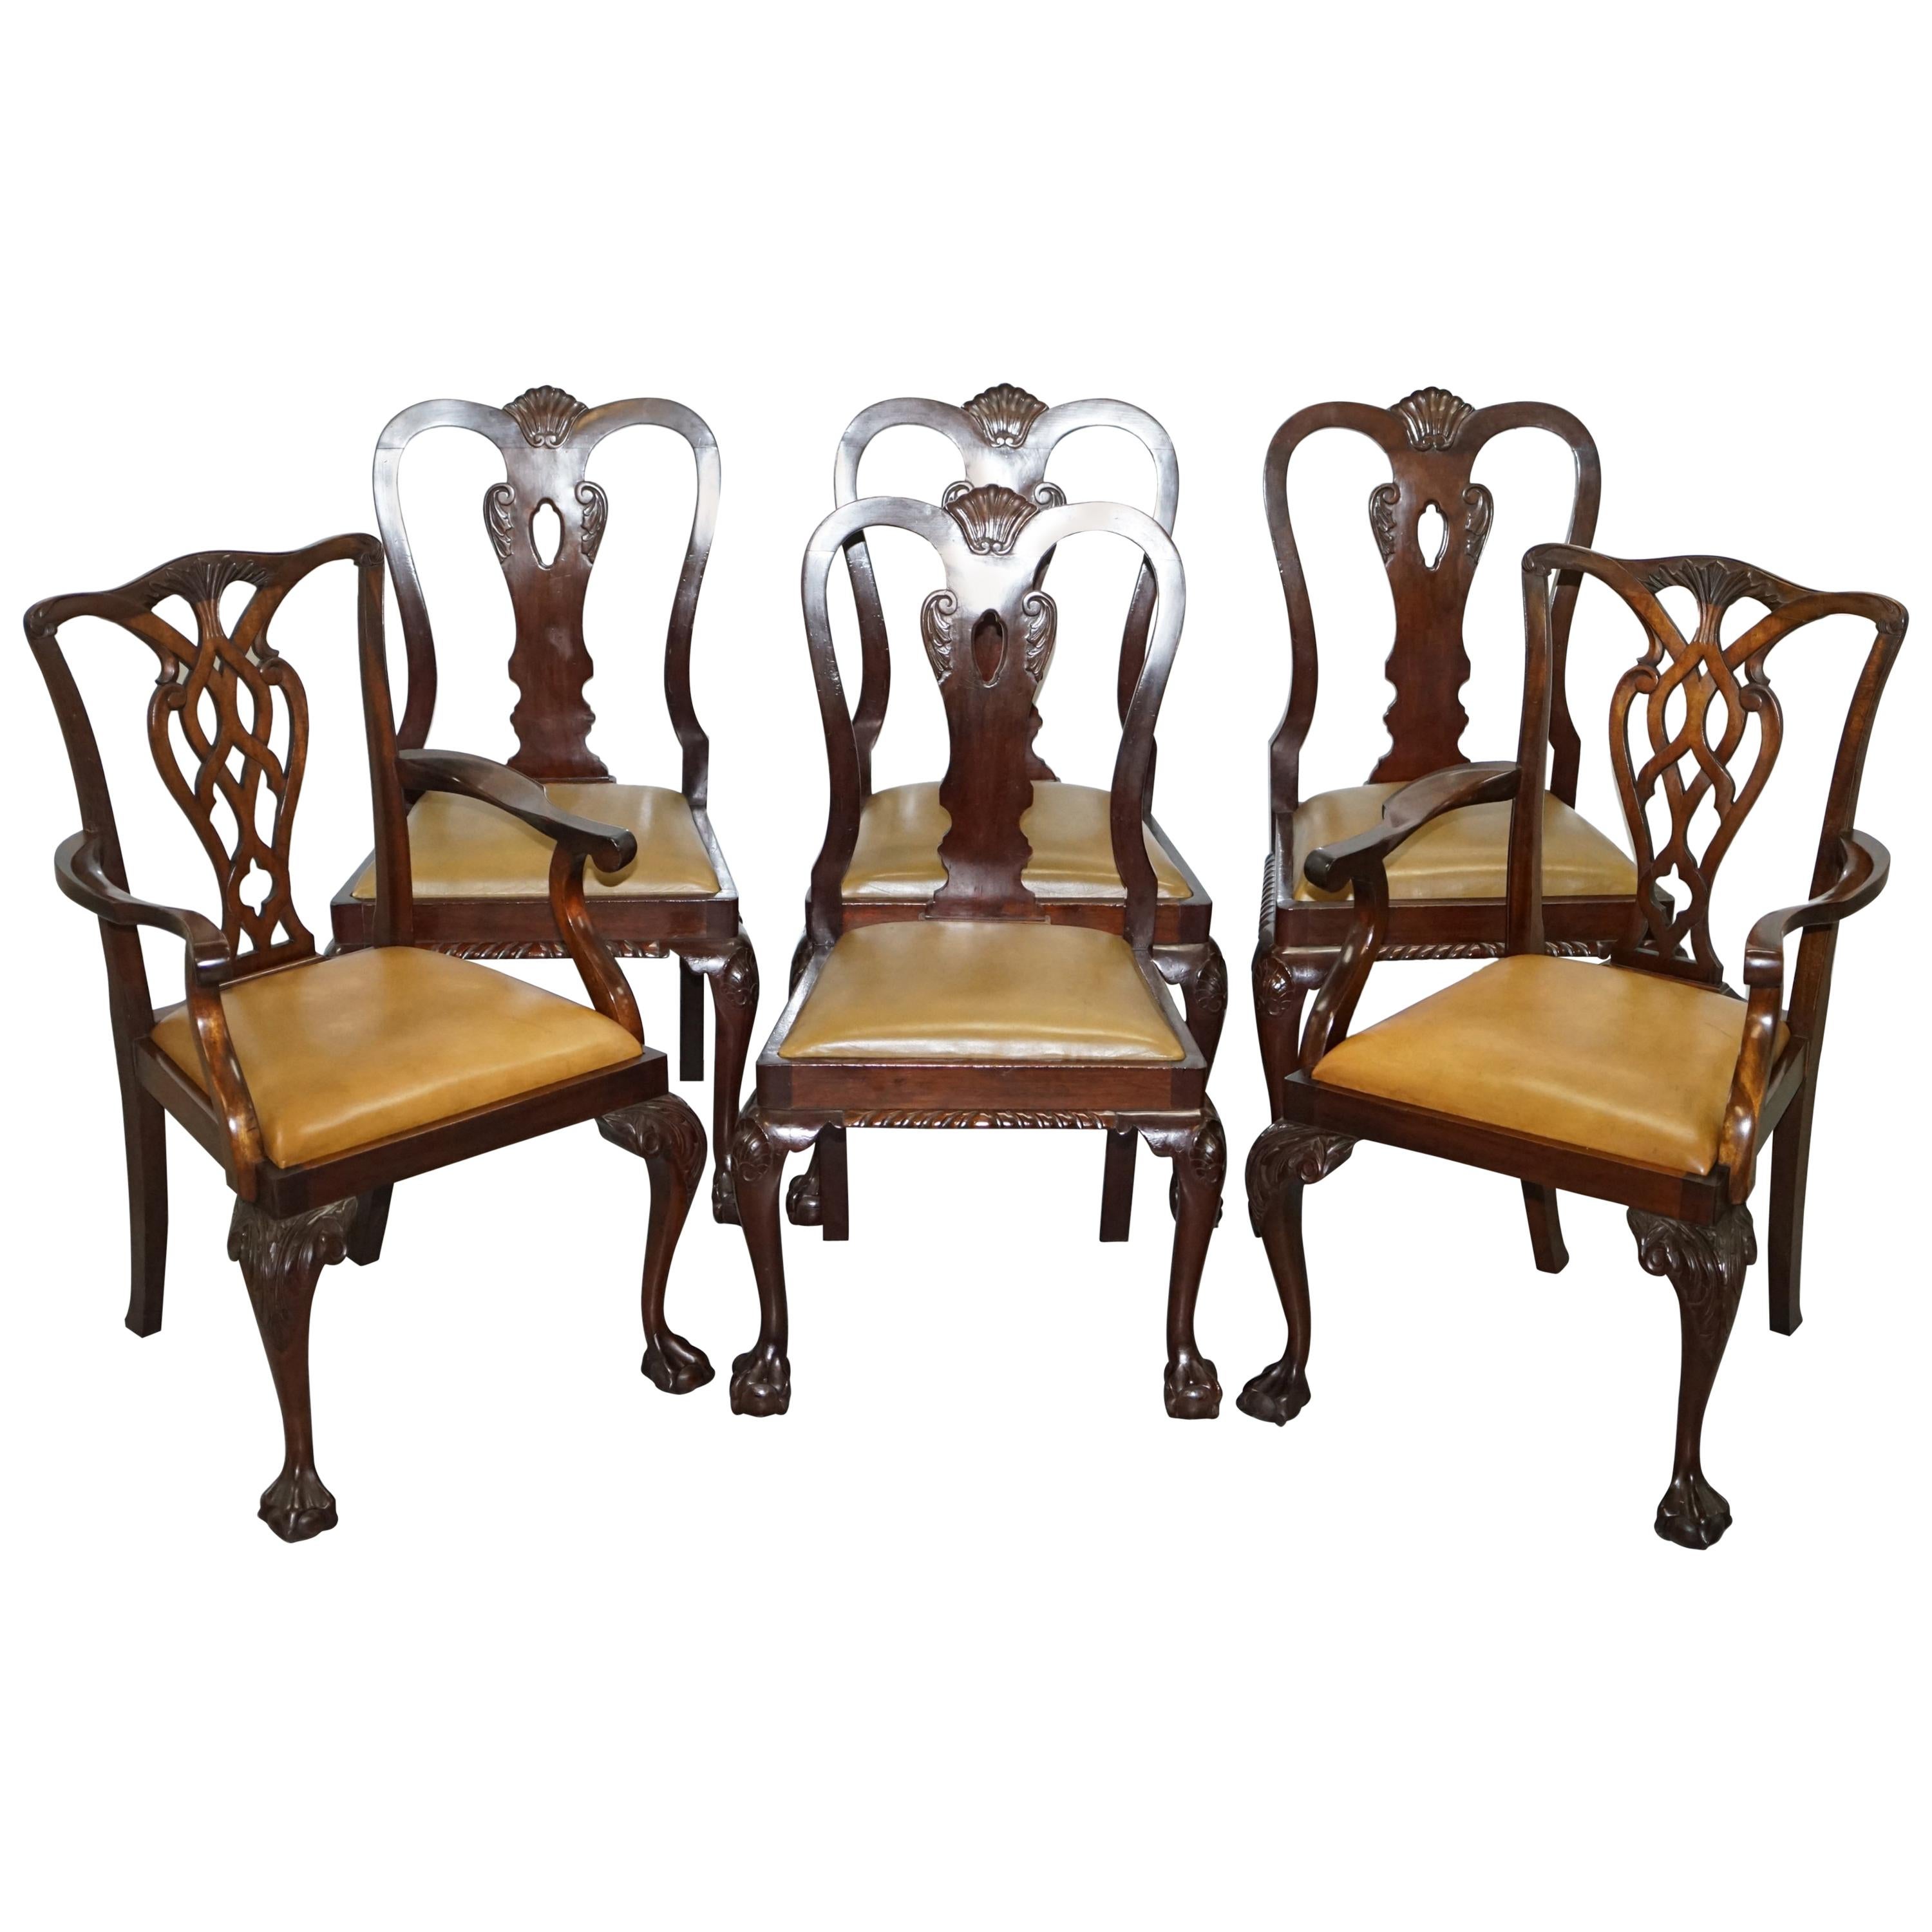 Set of 6 Claw and Ball Mahogany Thomas Chippendale Style Antique Dining Chairs